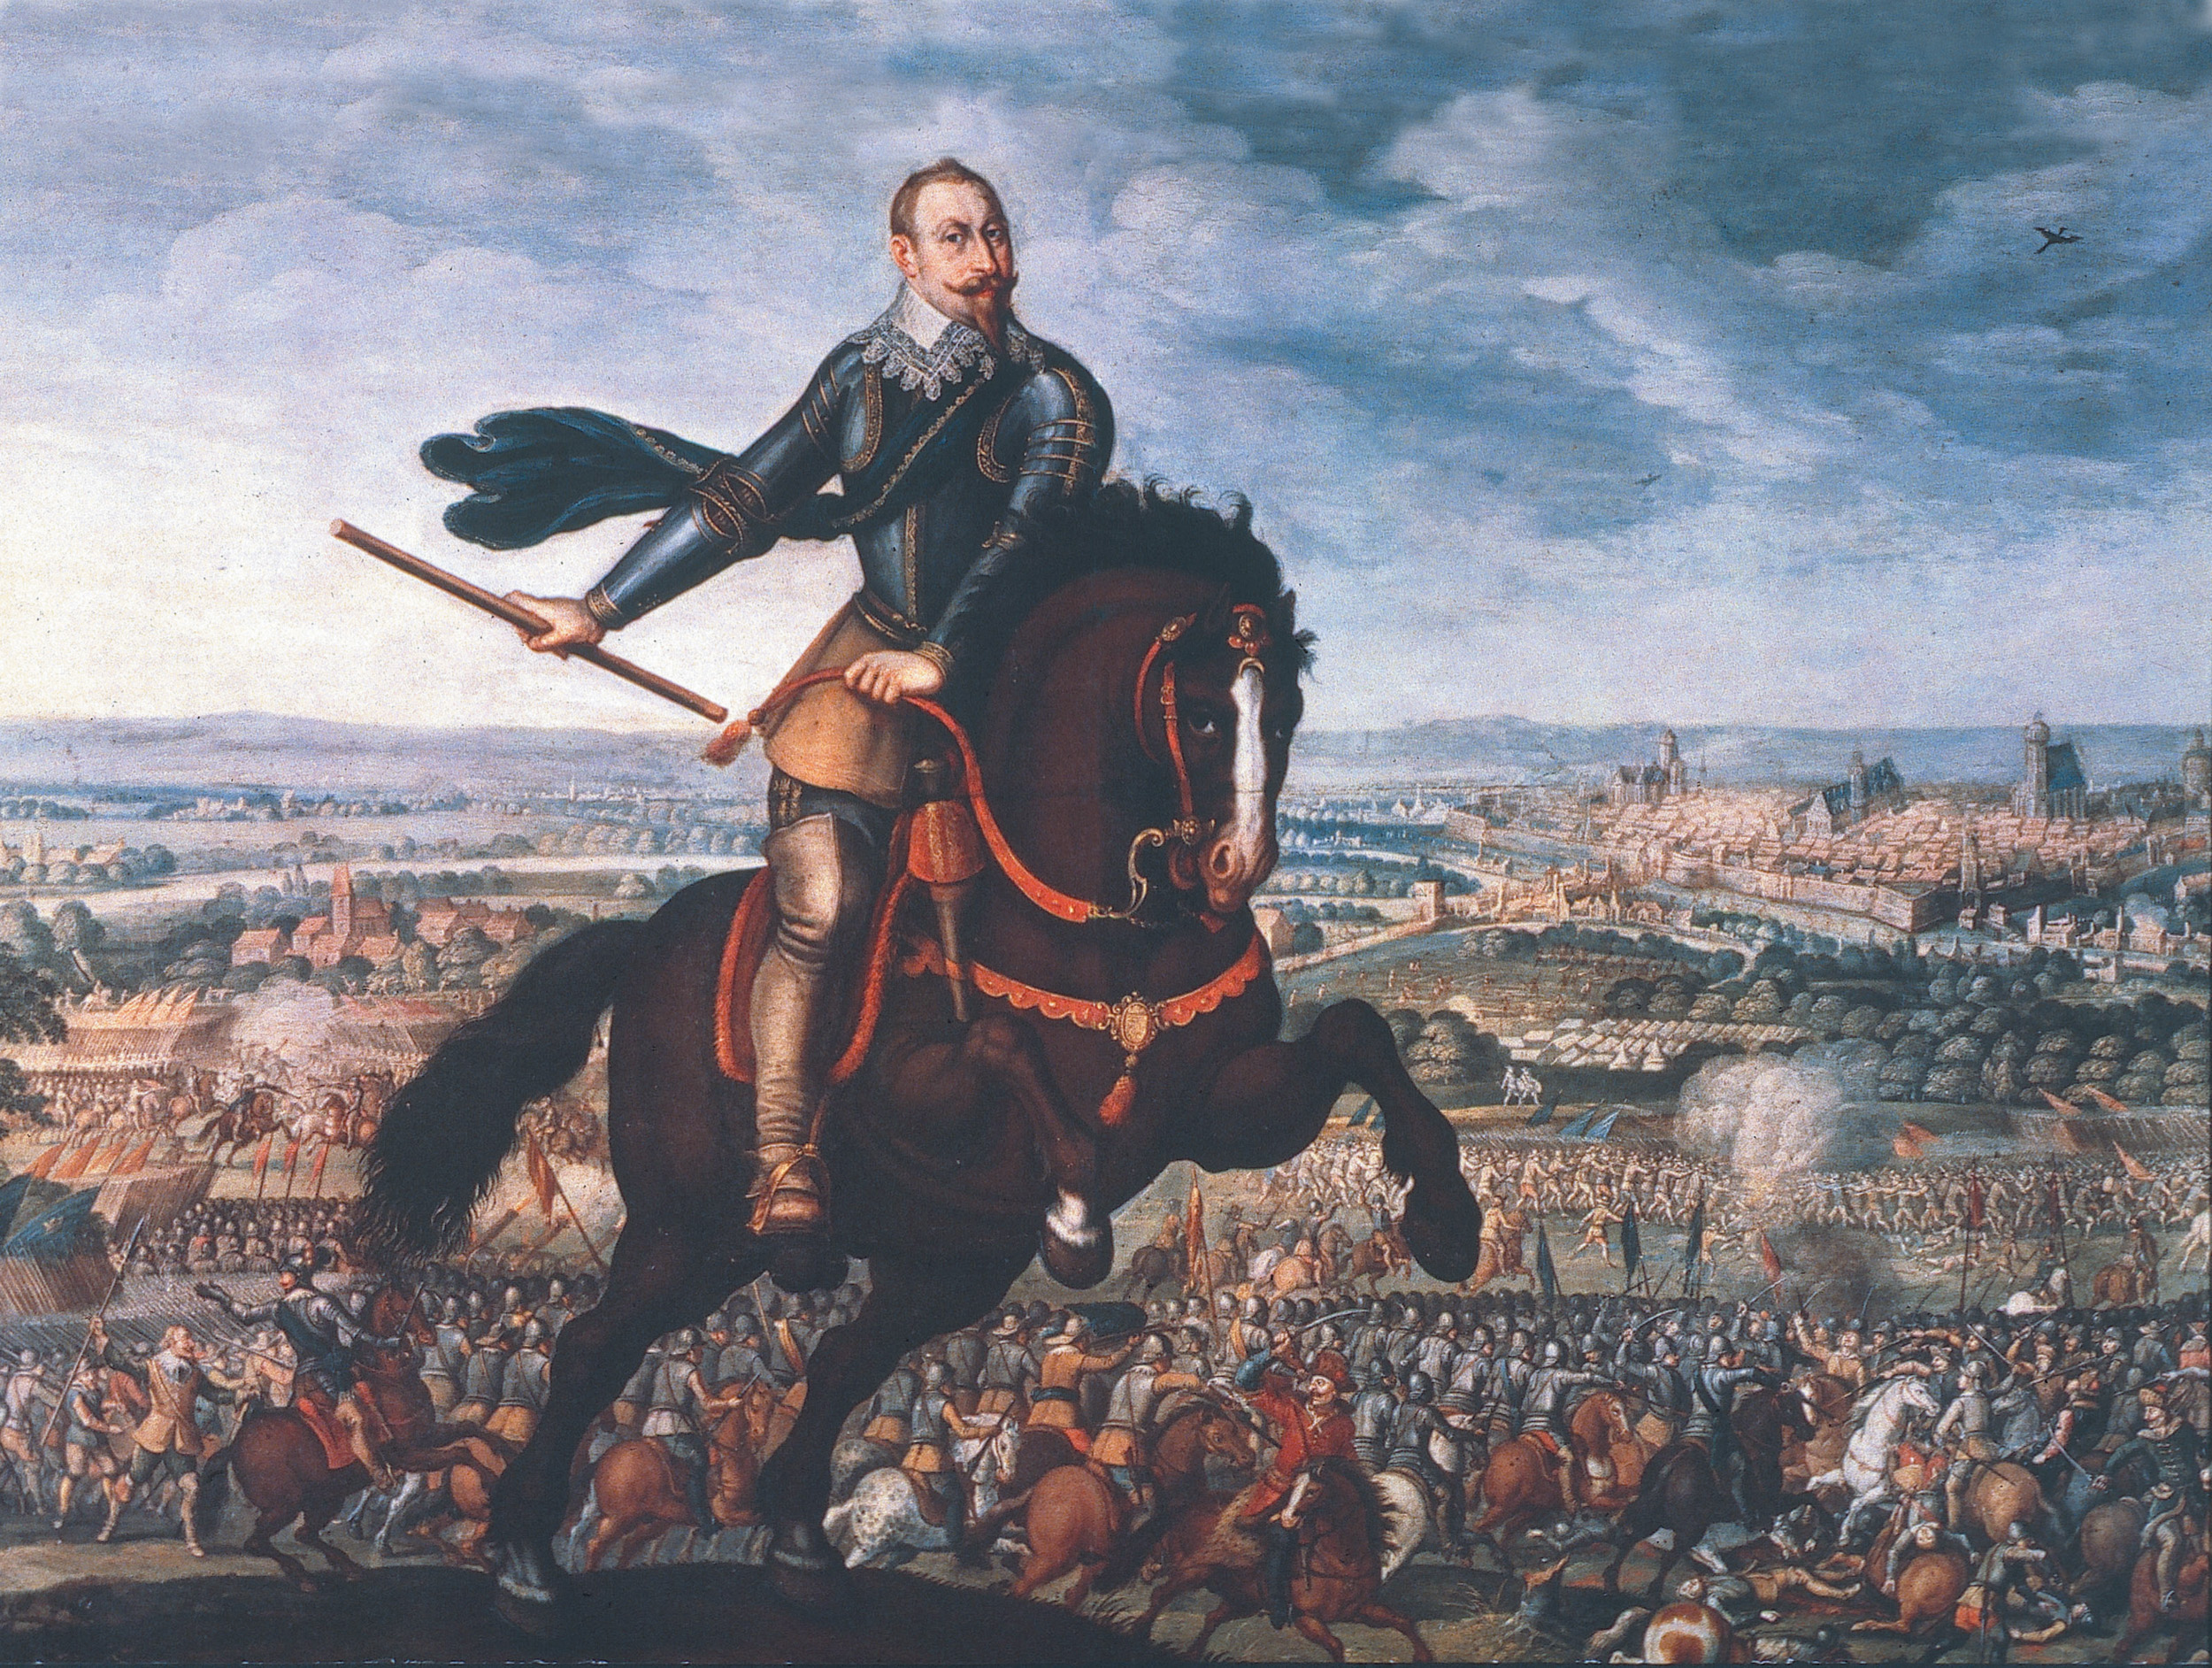 King Gustavus Adolphus II of Sweden had prepared diligently for the test of arms at Breitenfeld. His newly-styled army would not let him down.